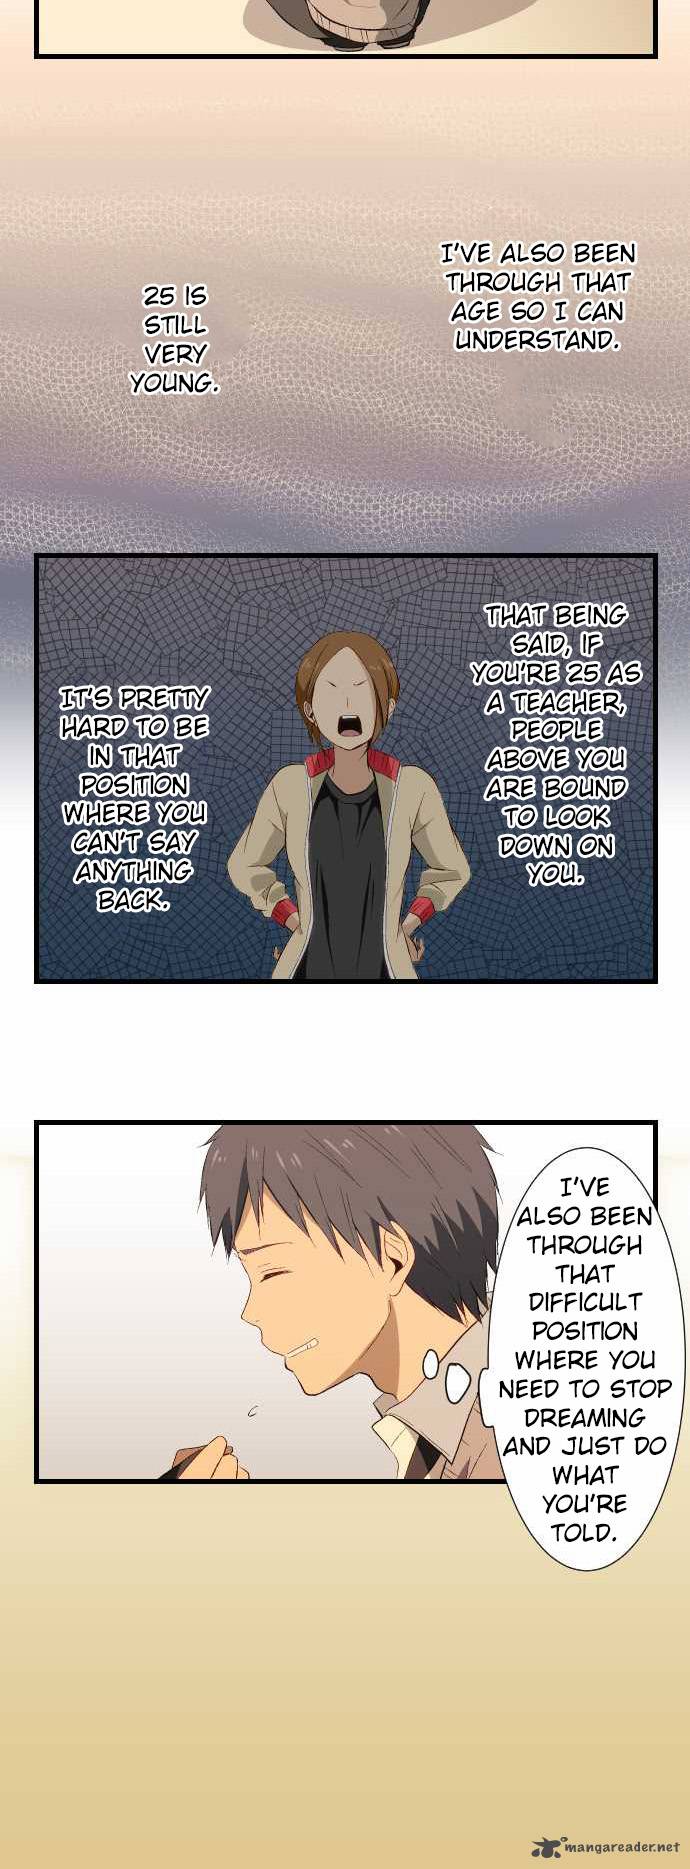 Relife 16 14